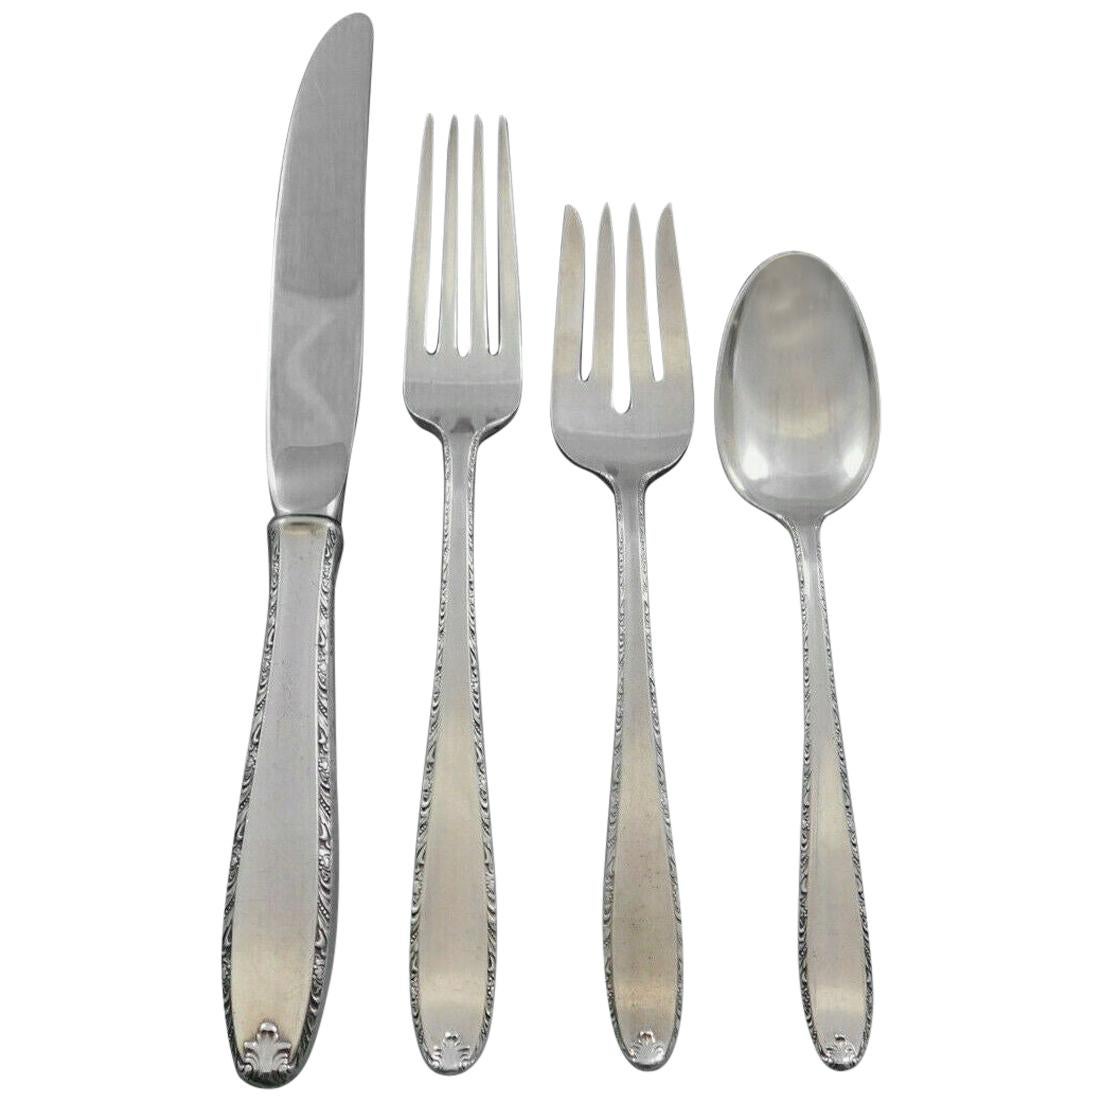 Southern Charm by Alvin Sterling Silver Flatware Set for 8 Service 32 Pcs